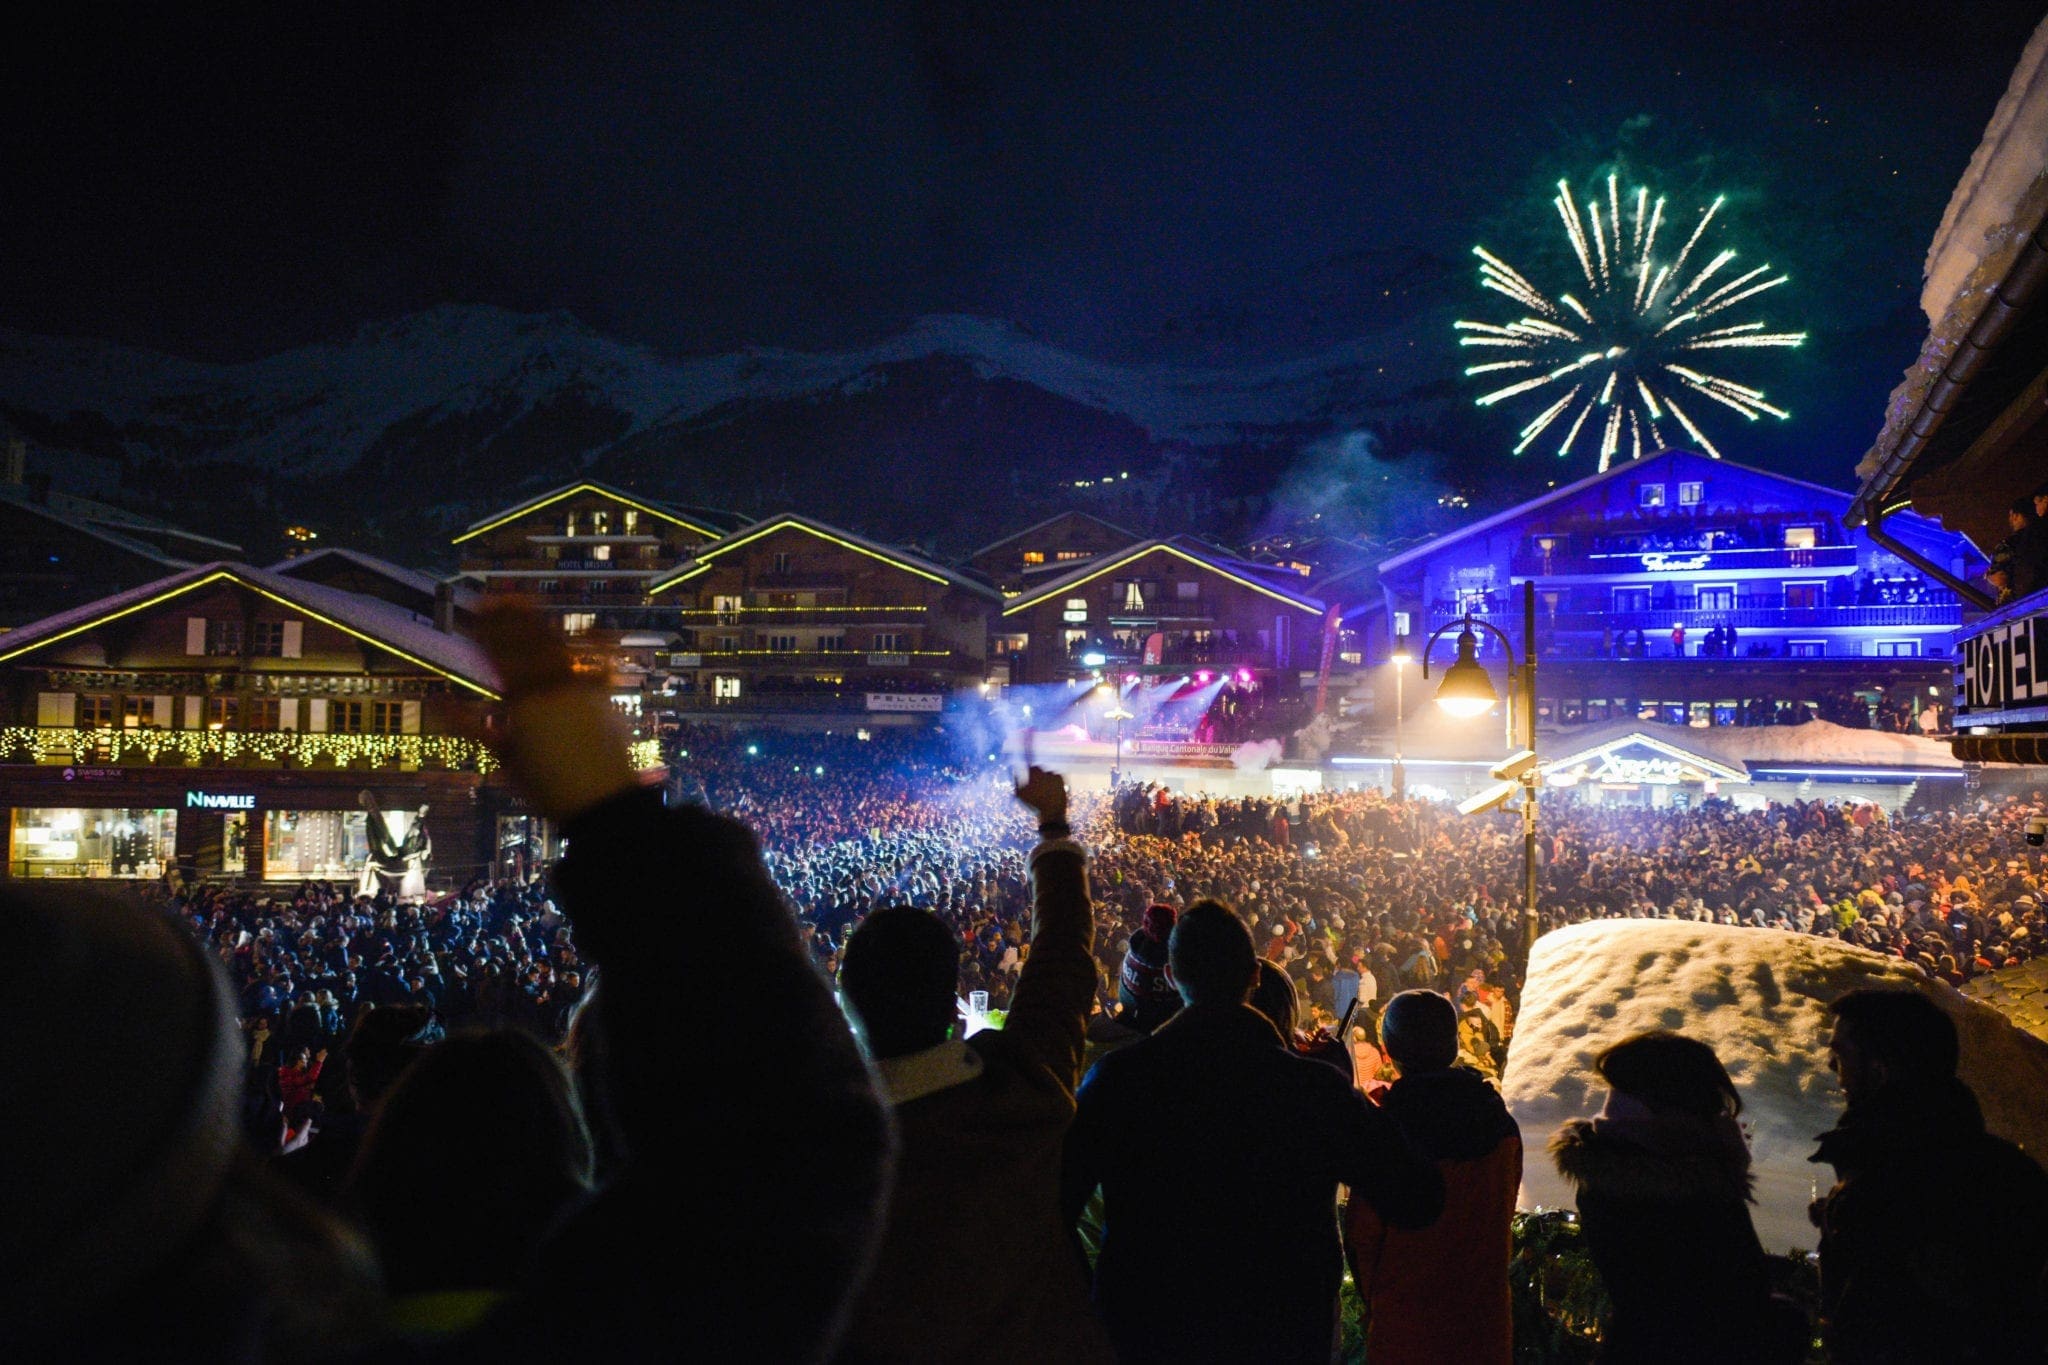 How to make the most of your New Years Ski Holiday